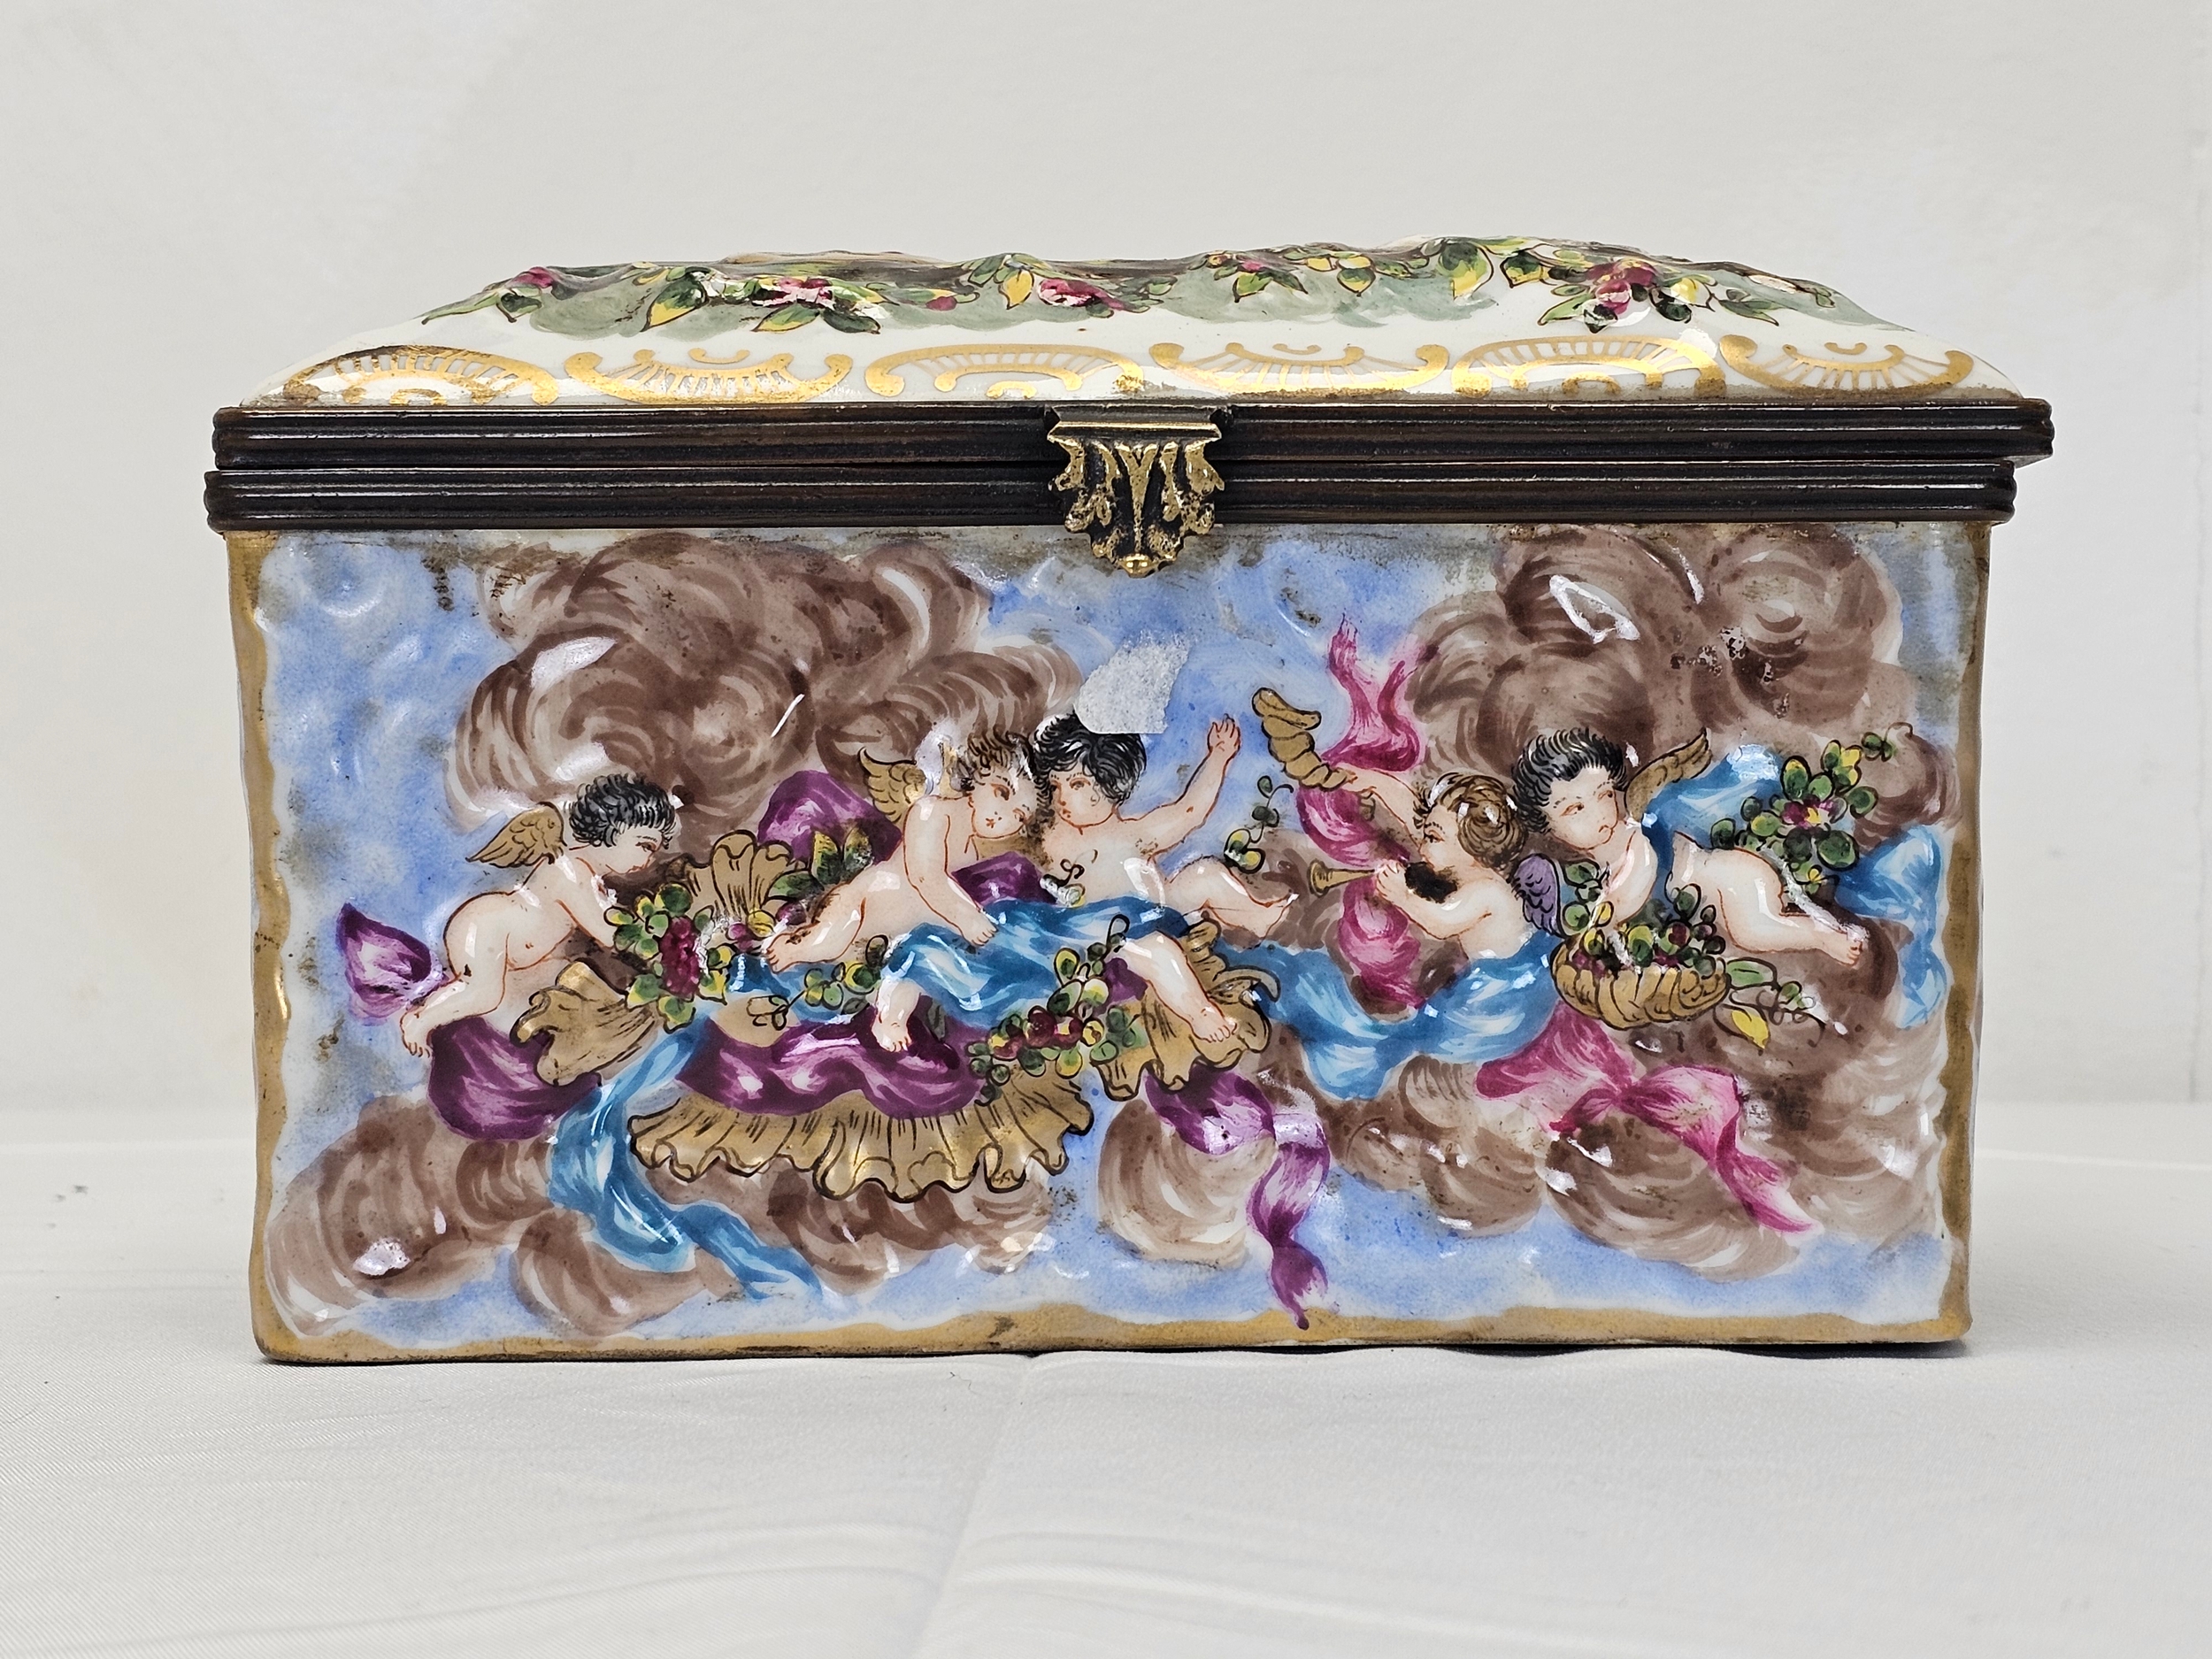 A 20th century Naples Capodimonte rectangular hand painted ceramic lidded box, moulded in low relief